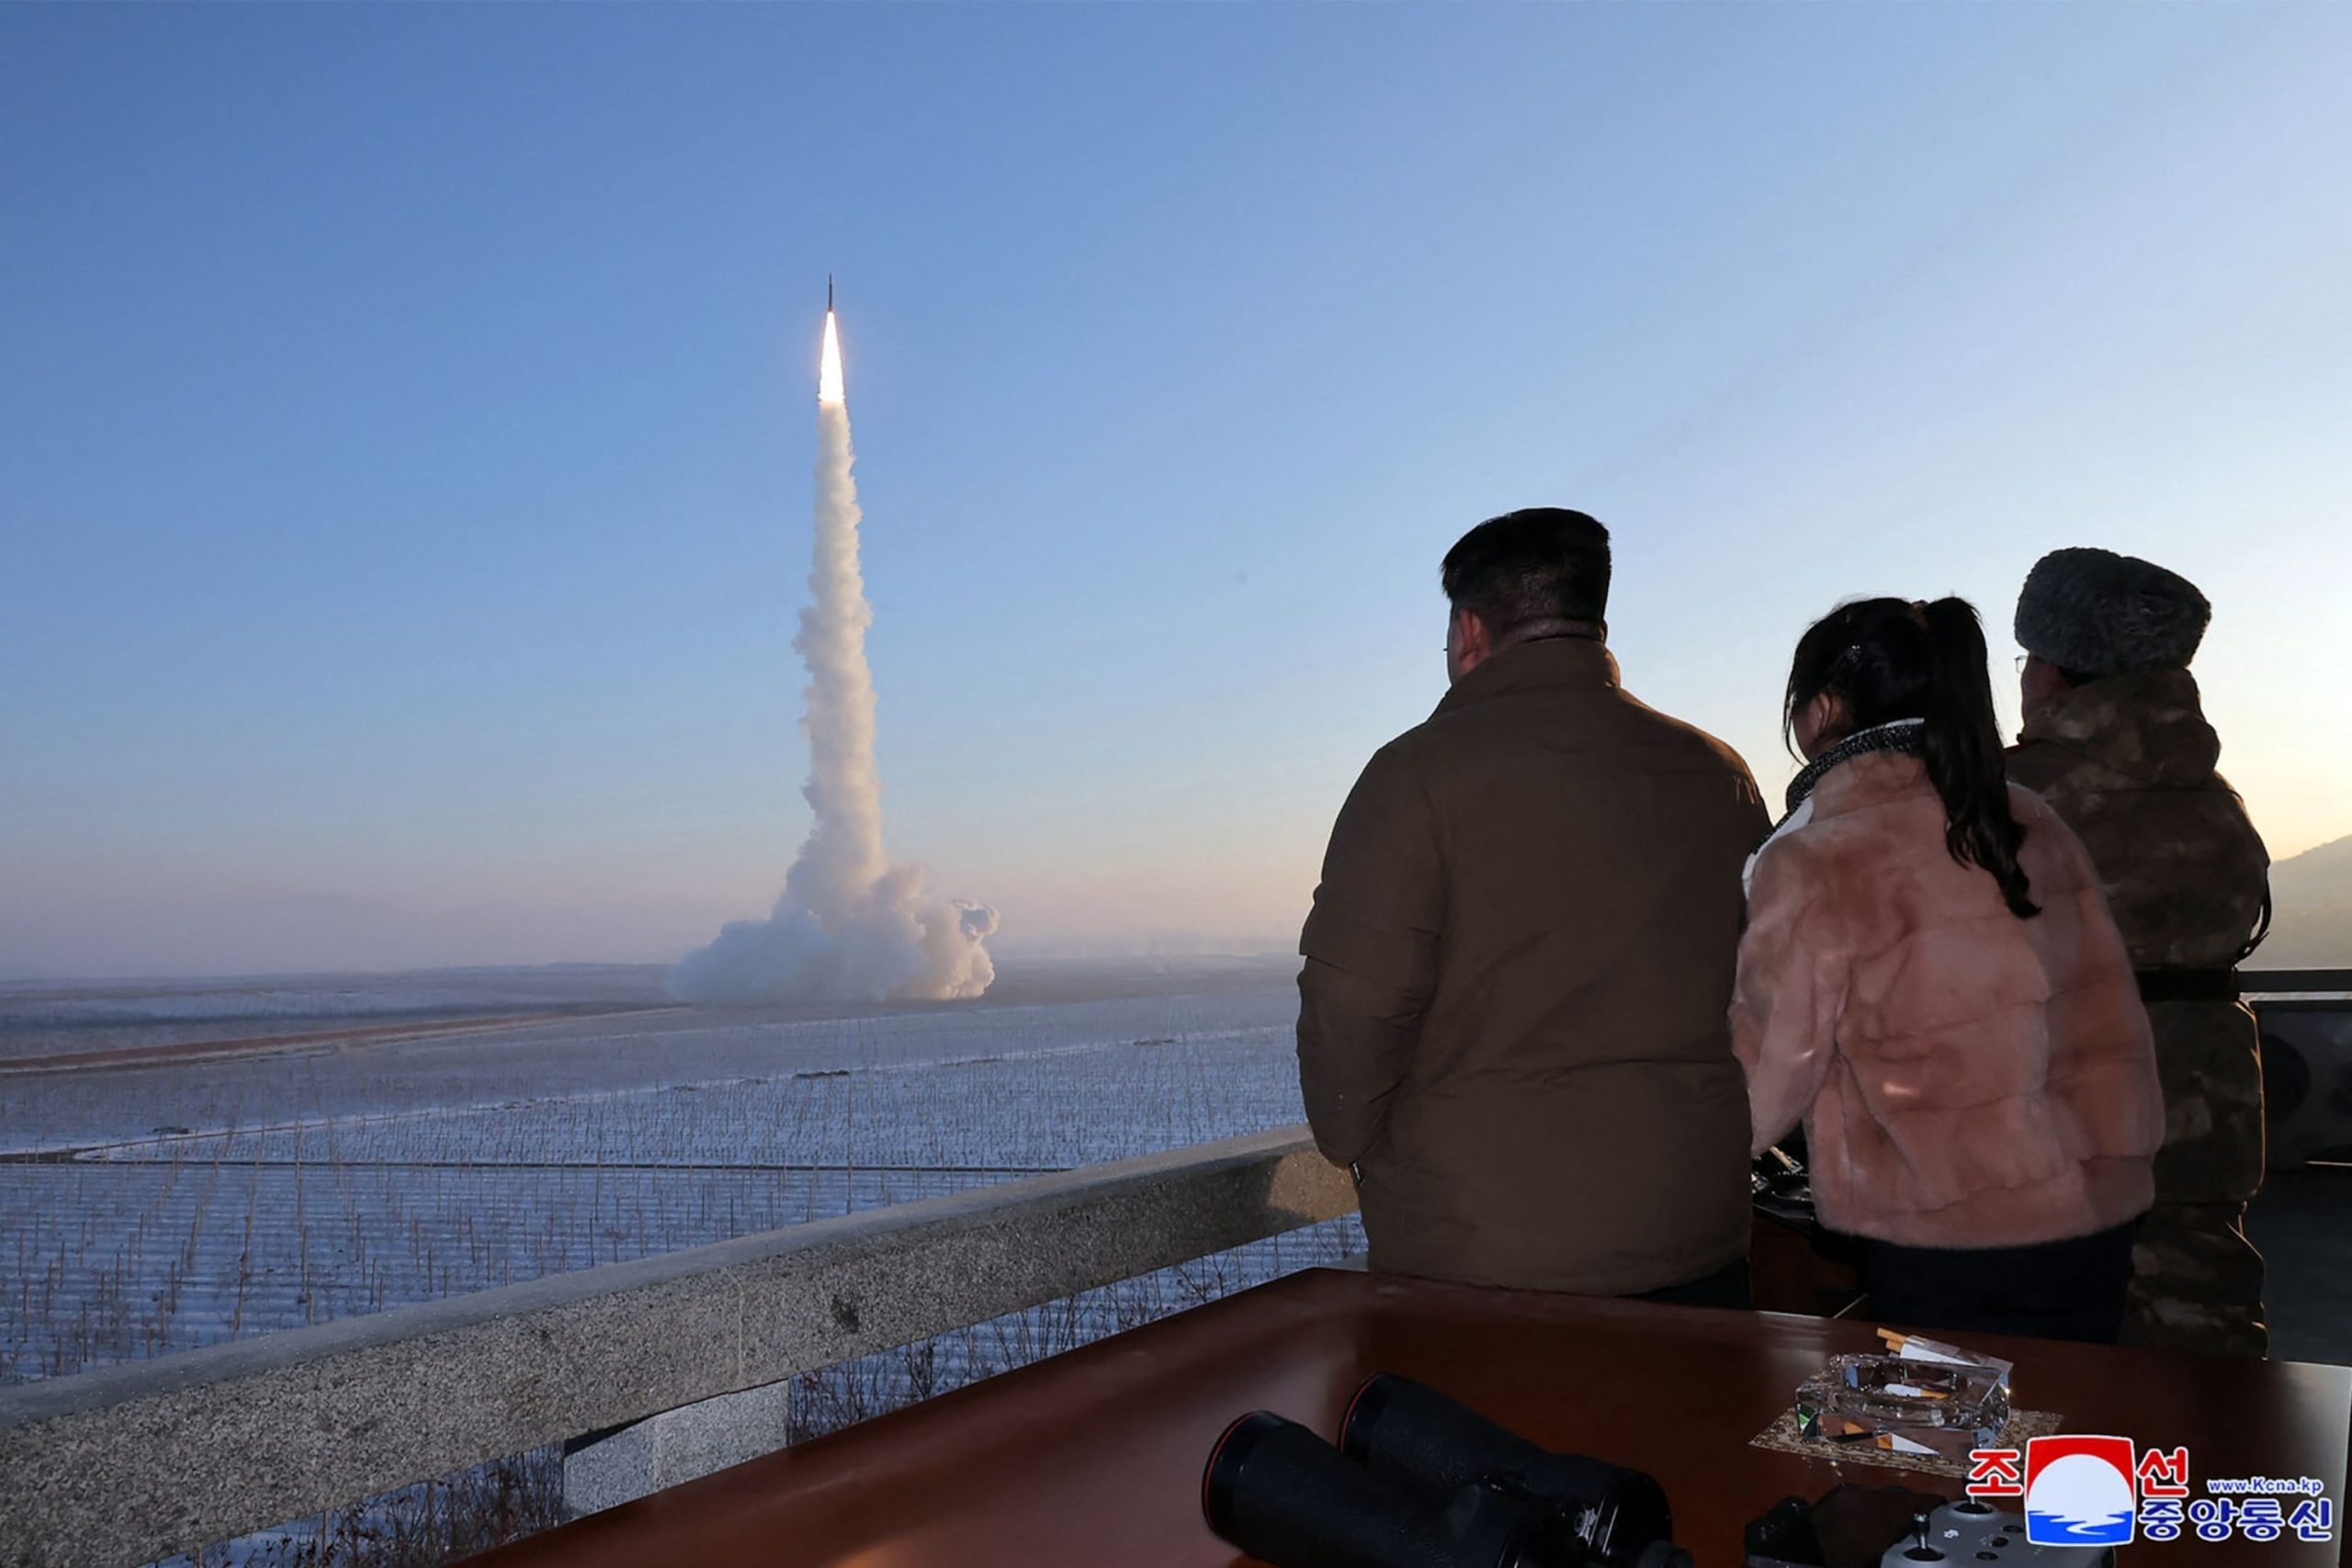 Kim Jong Un's Daughter Joins Missile Launch, Prompting Speculation on Succession Plans